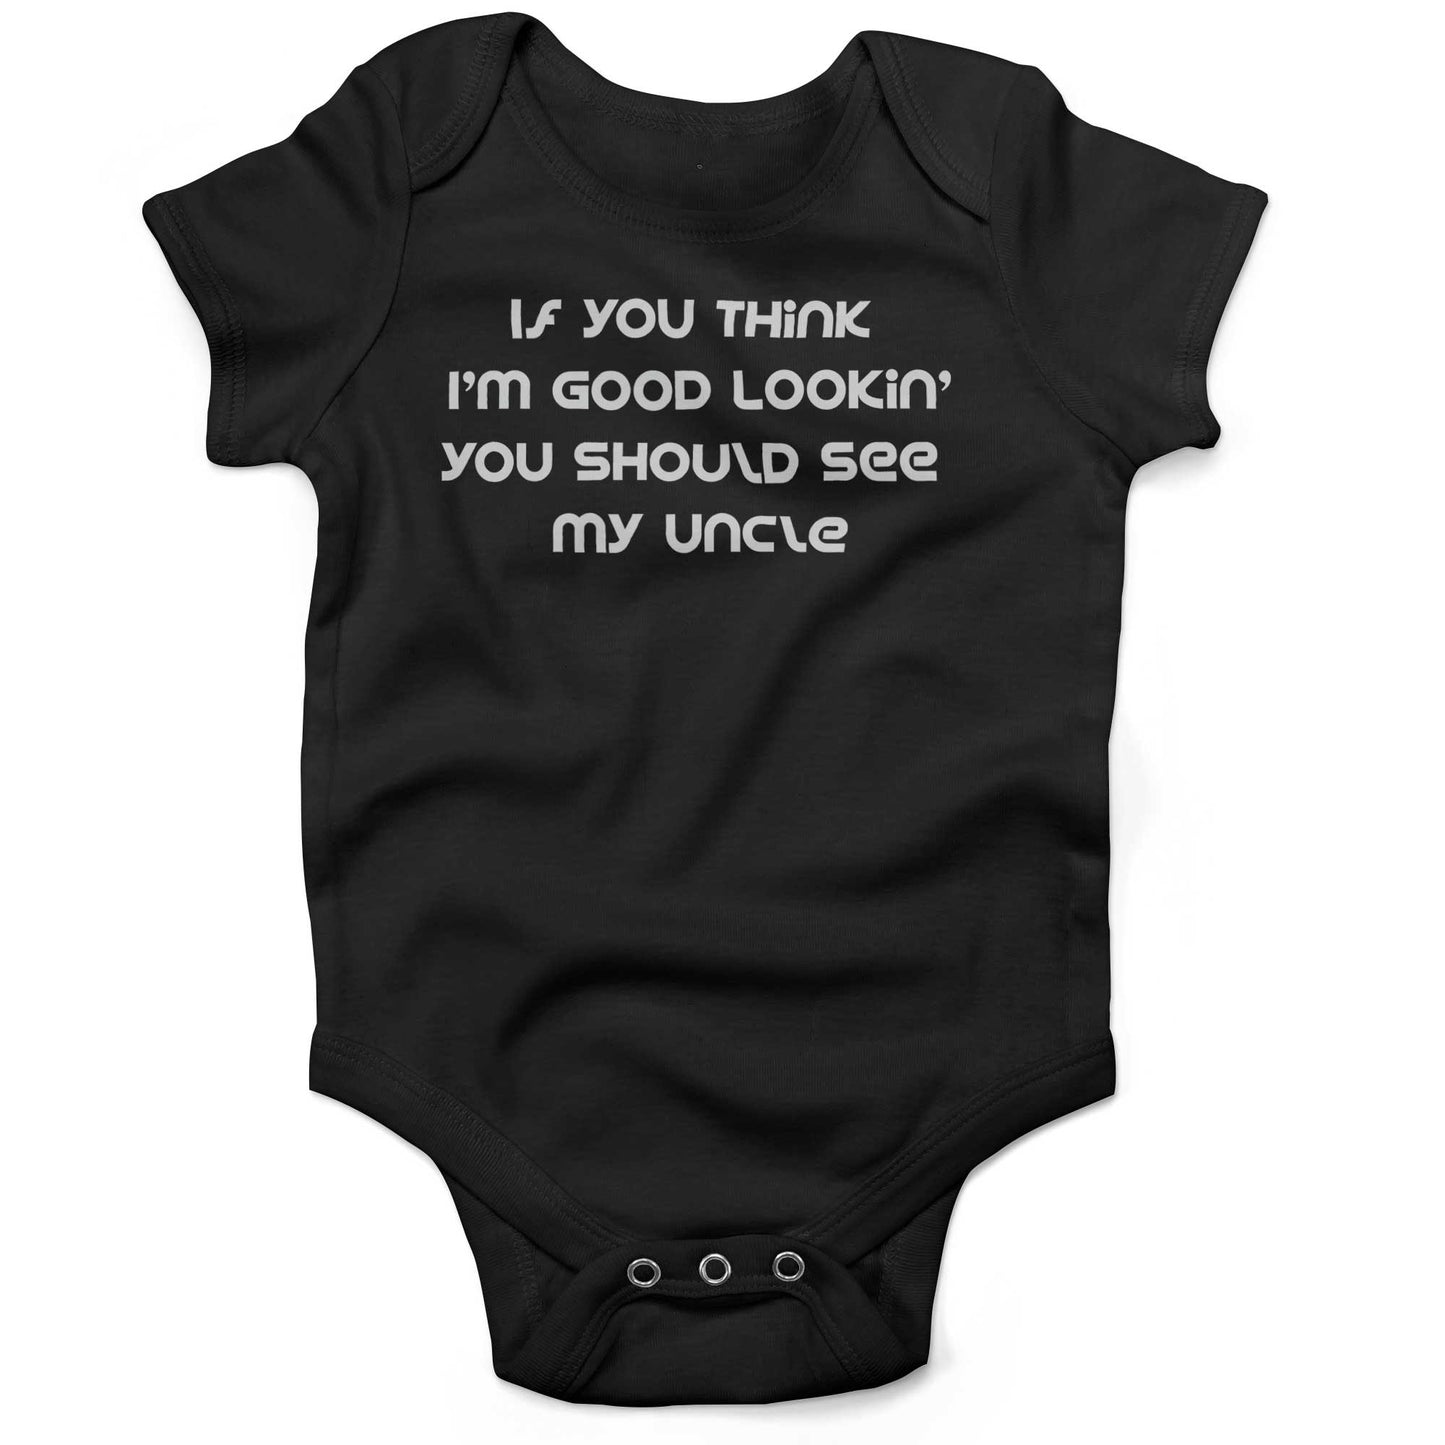 If You Think I'm Good Lookin' You Should See My Uncle Infant Bodysuit or Raglan Tee-Organic Black-3-6 months